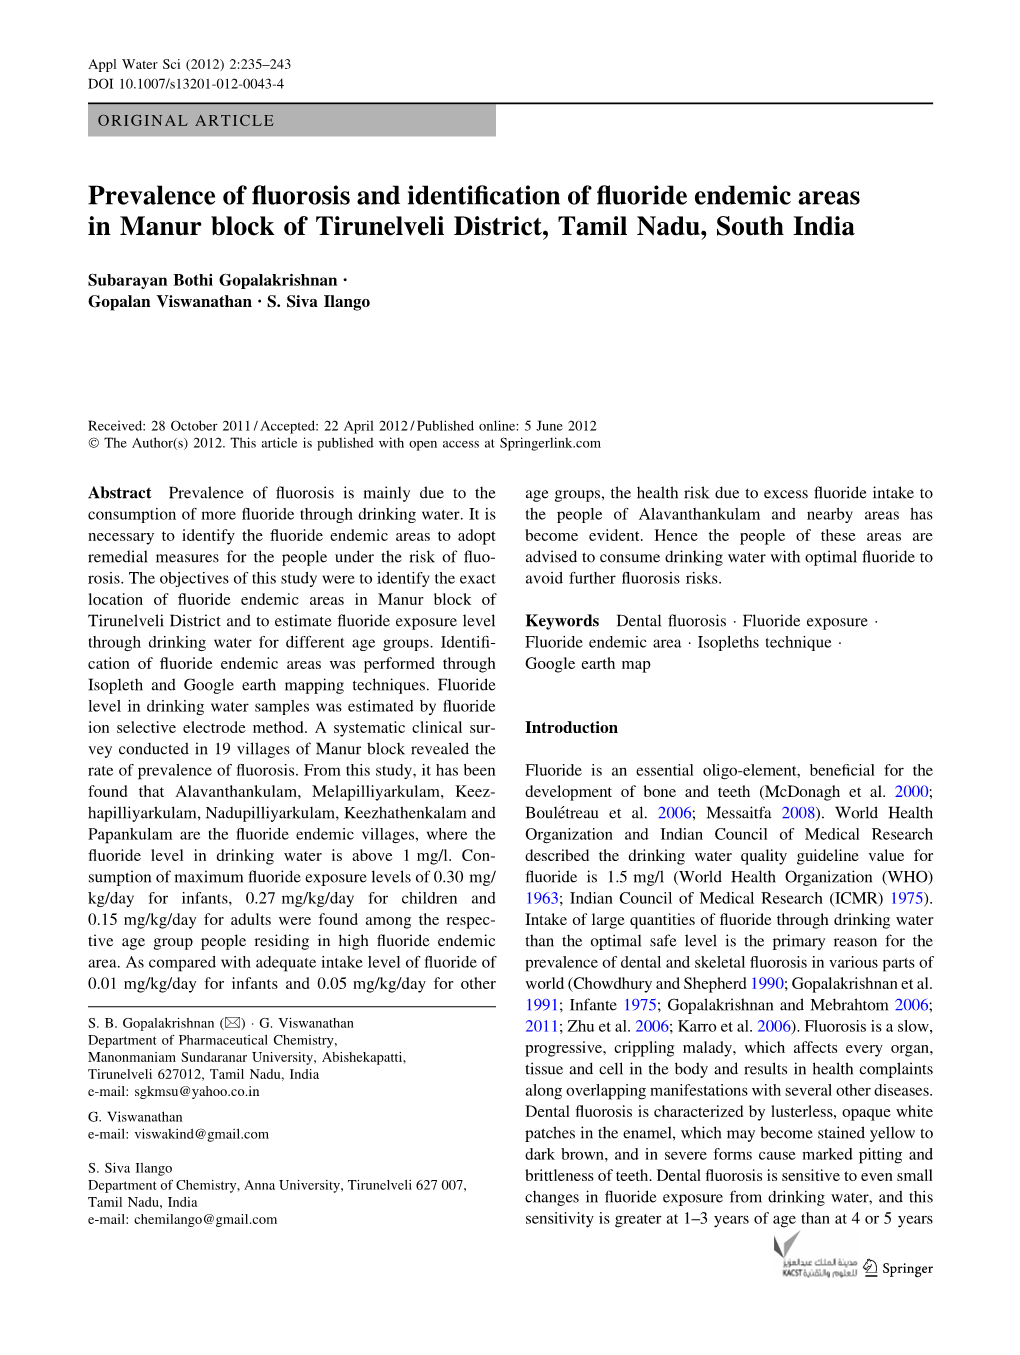 Prevalence of Fluorosis and Identification of Fluoride Endemic